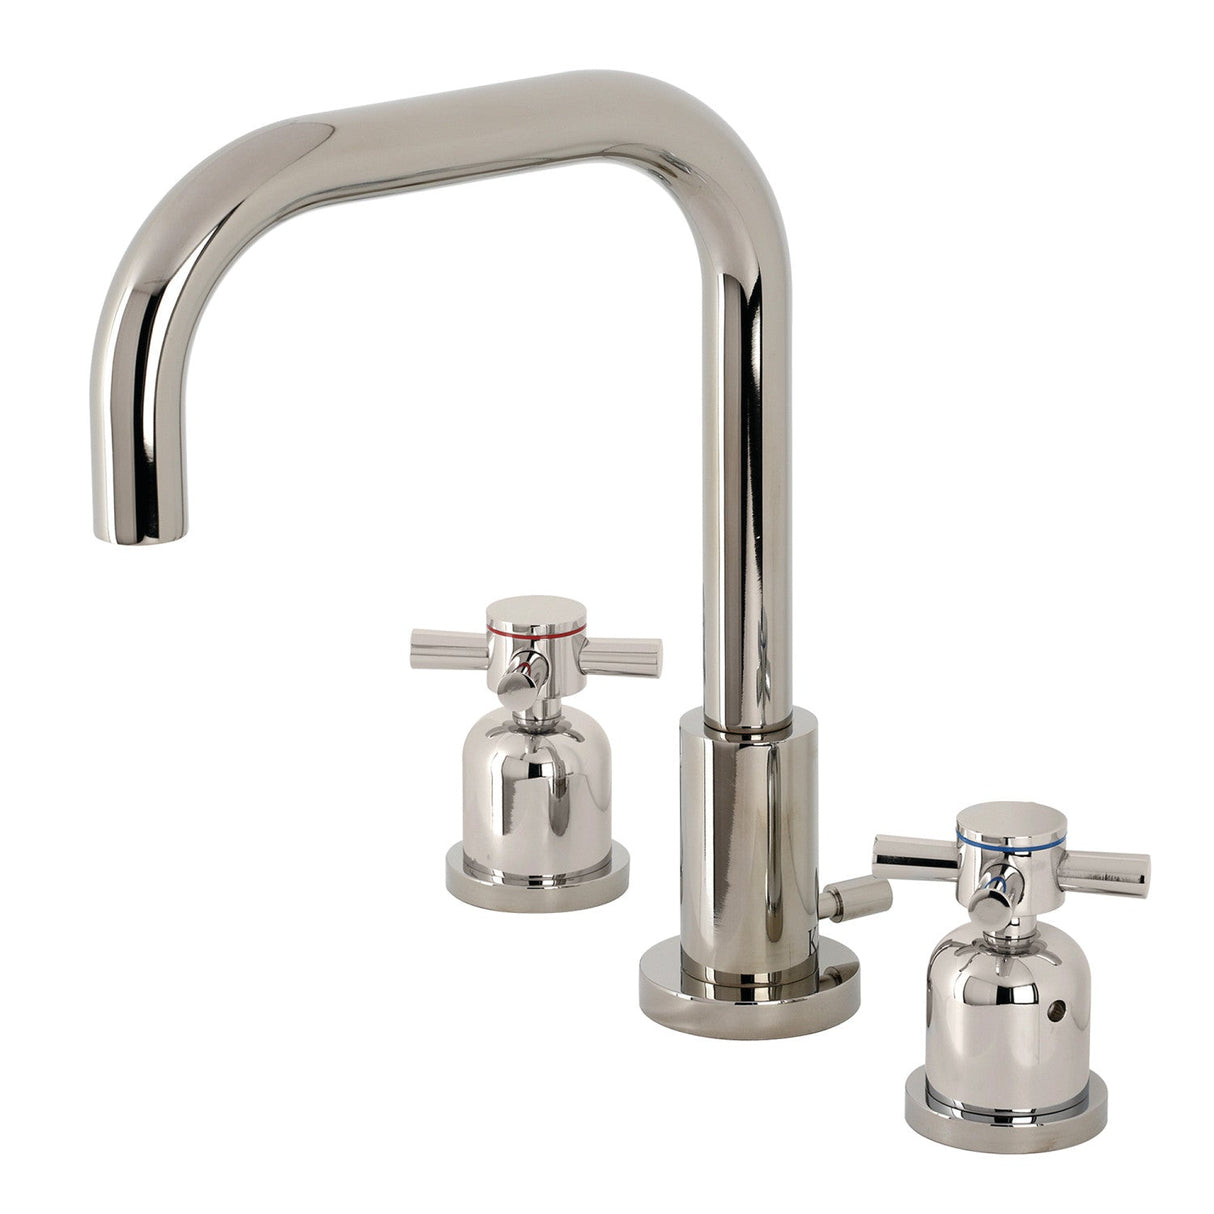 Concord FSC8939DX Two-Handle 3-Hole Deck Mount Widespread Bathroom Faucet with Pop-Up Drain, Polished Nickel